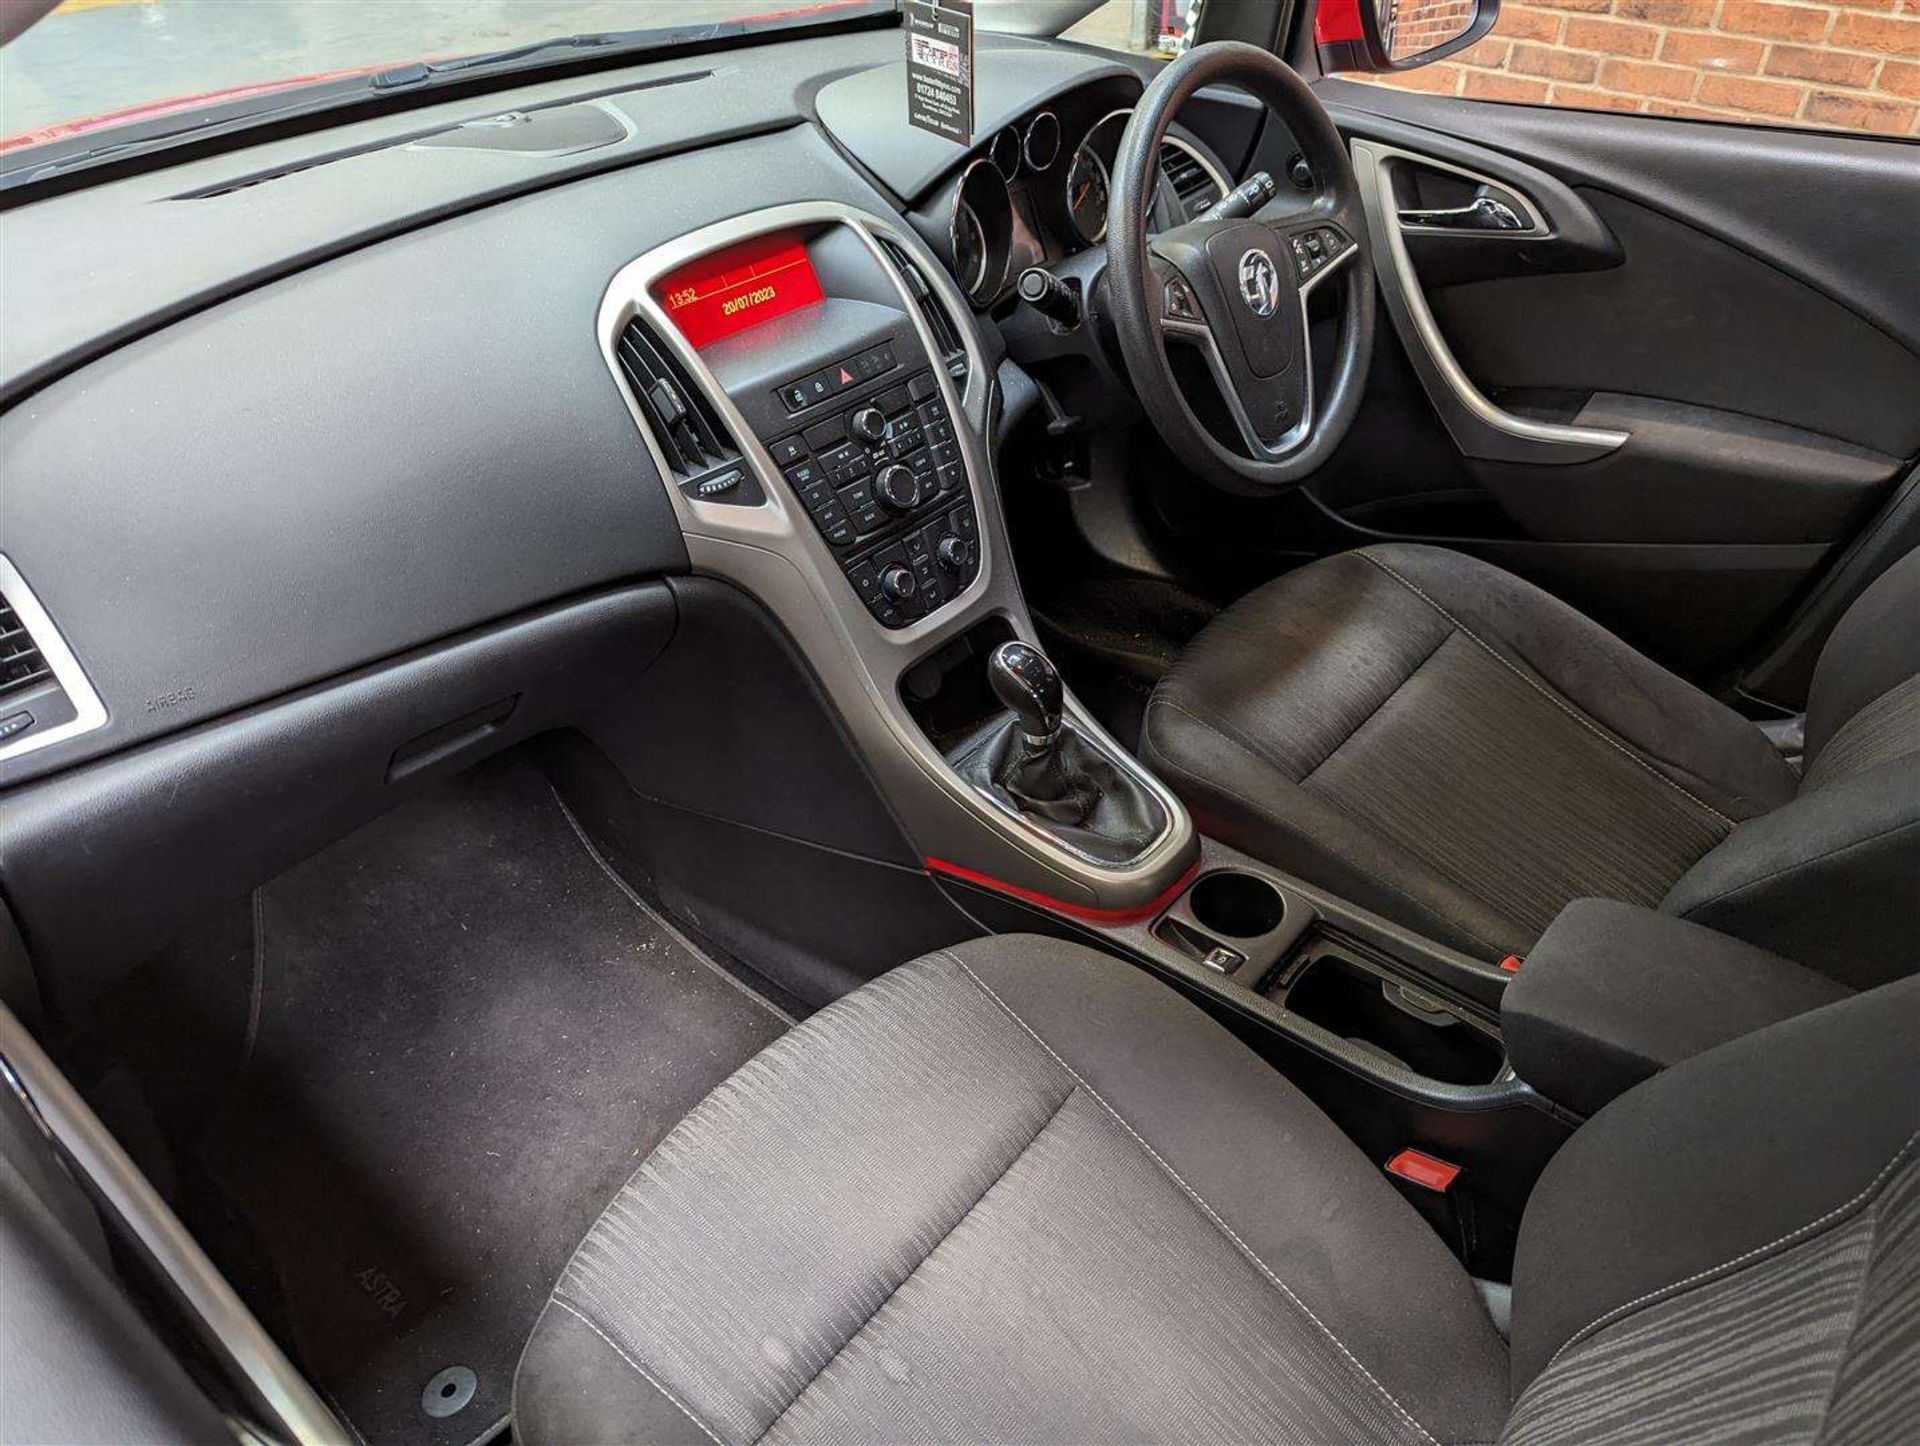 2011 VAUXHALL ASTRA EXCITE - Image 8 of 24